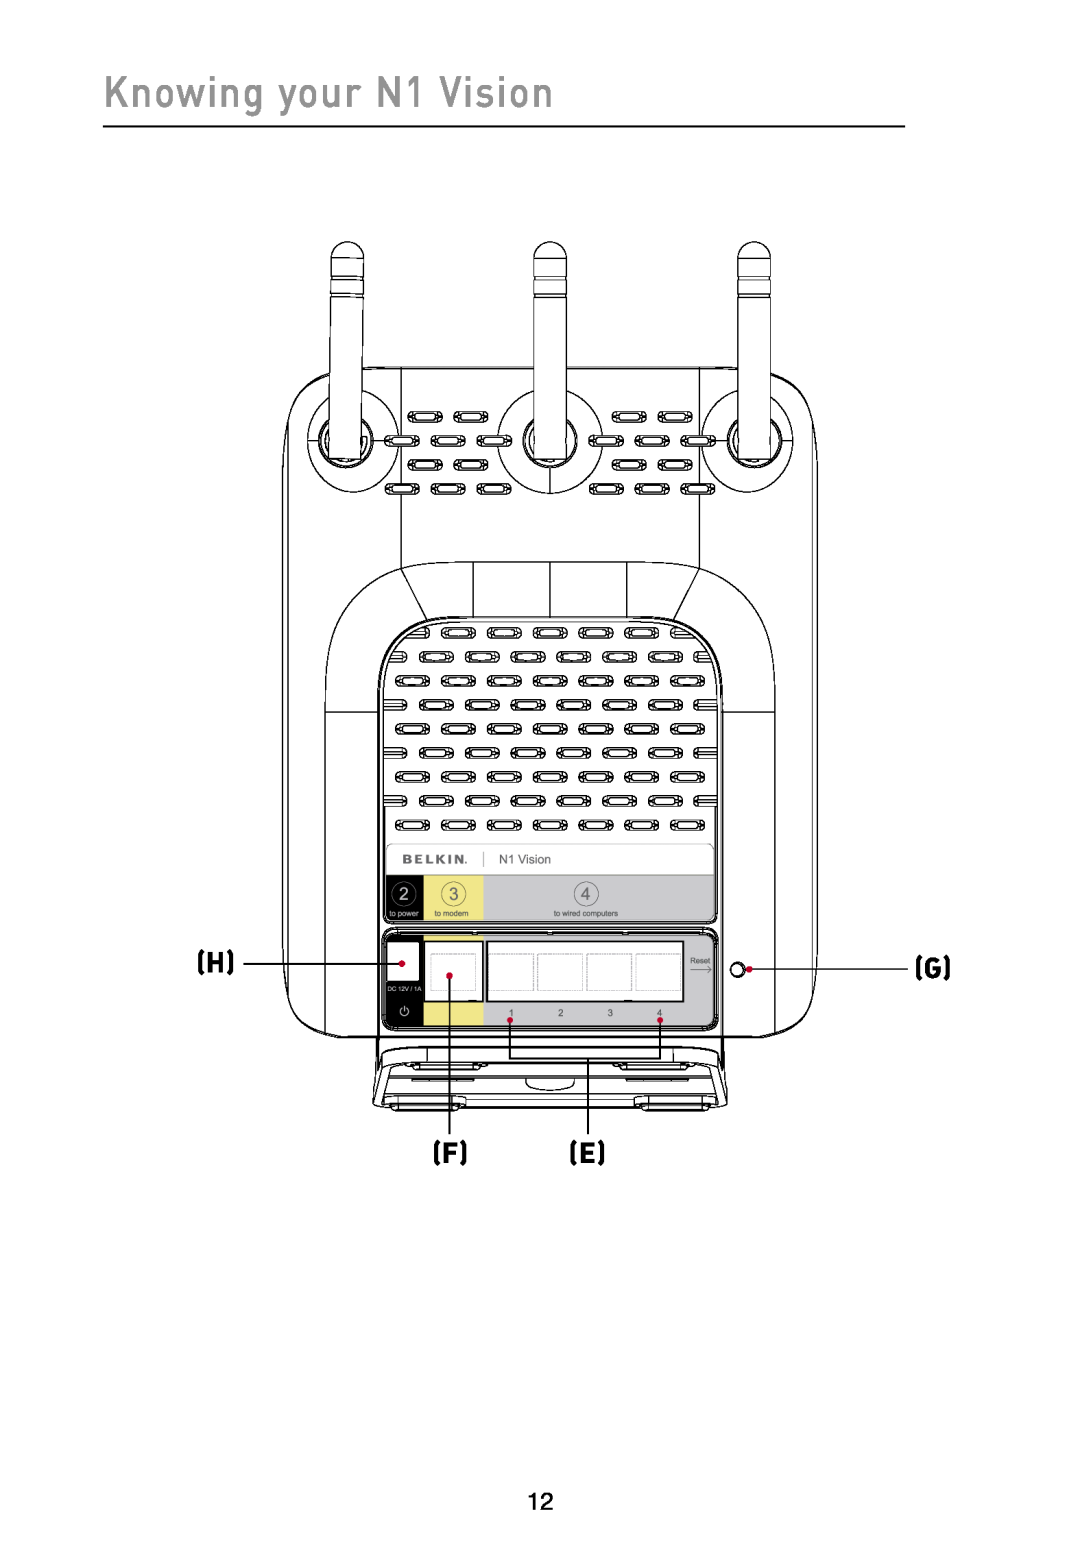 Belkin user manual H F E, Knowing your N1 Vision 